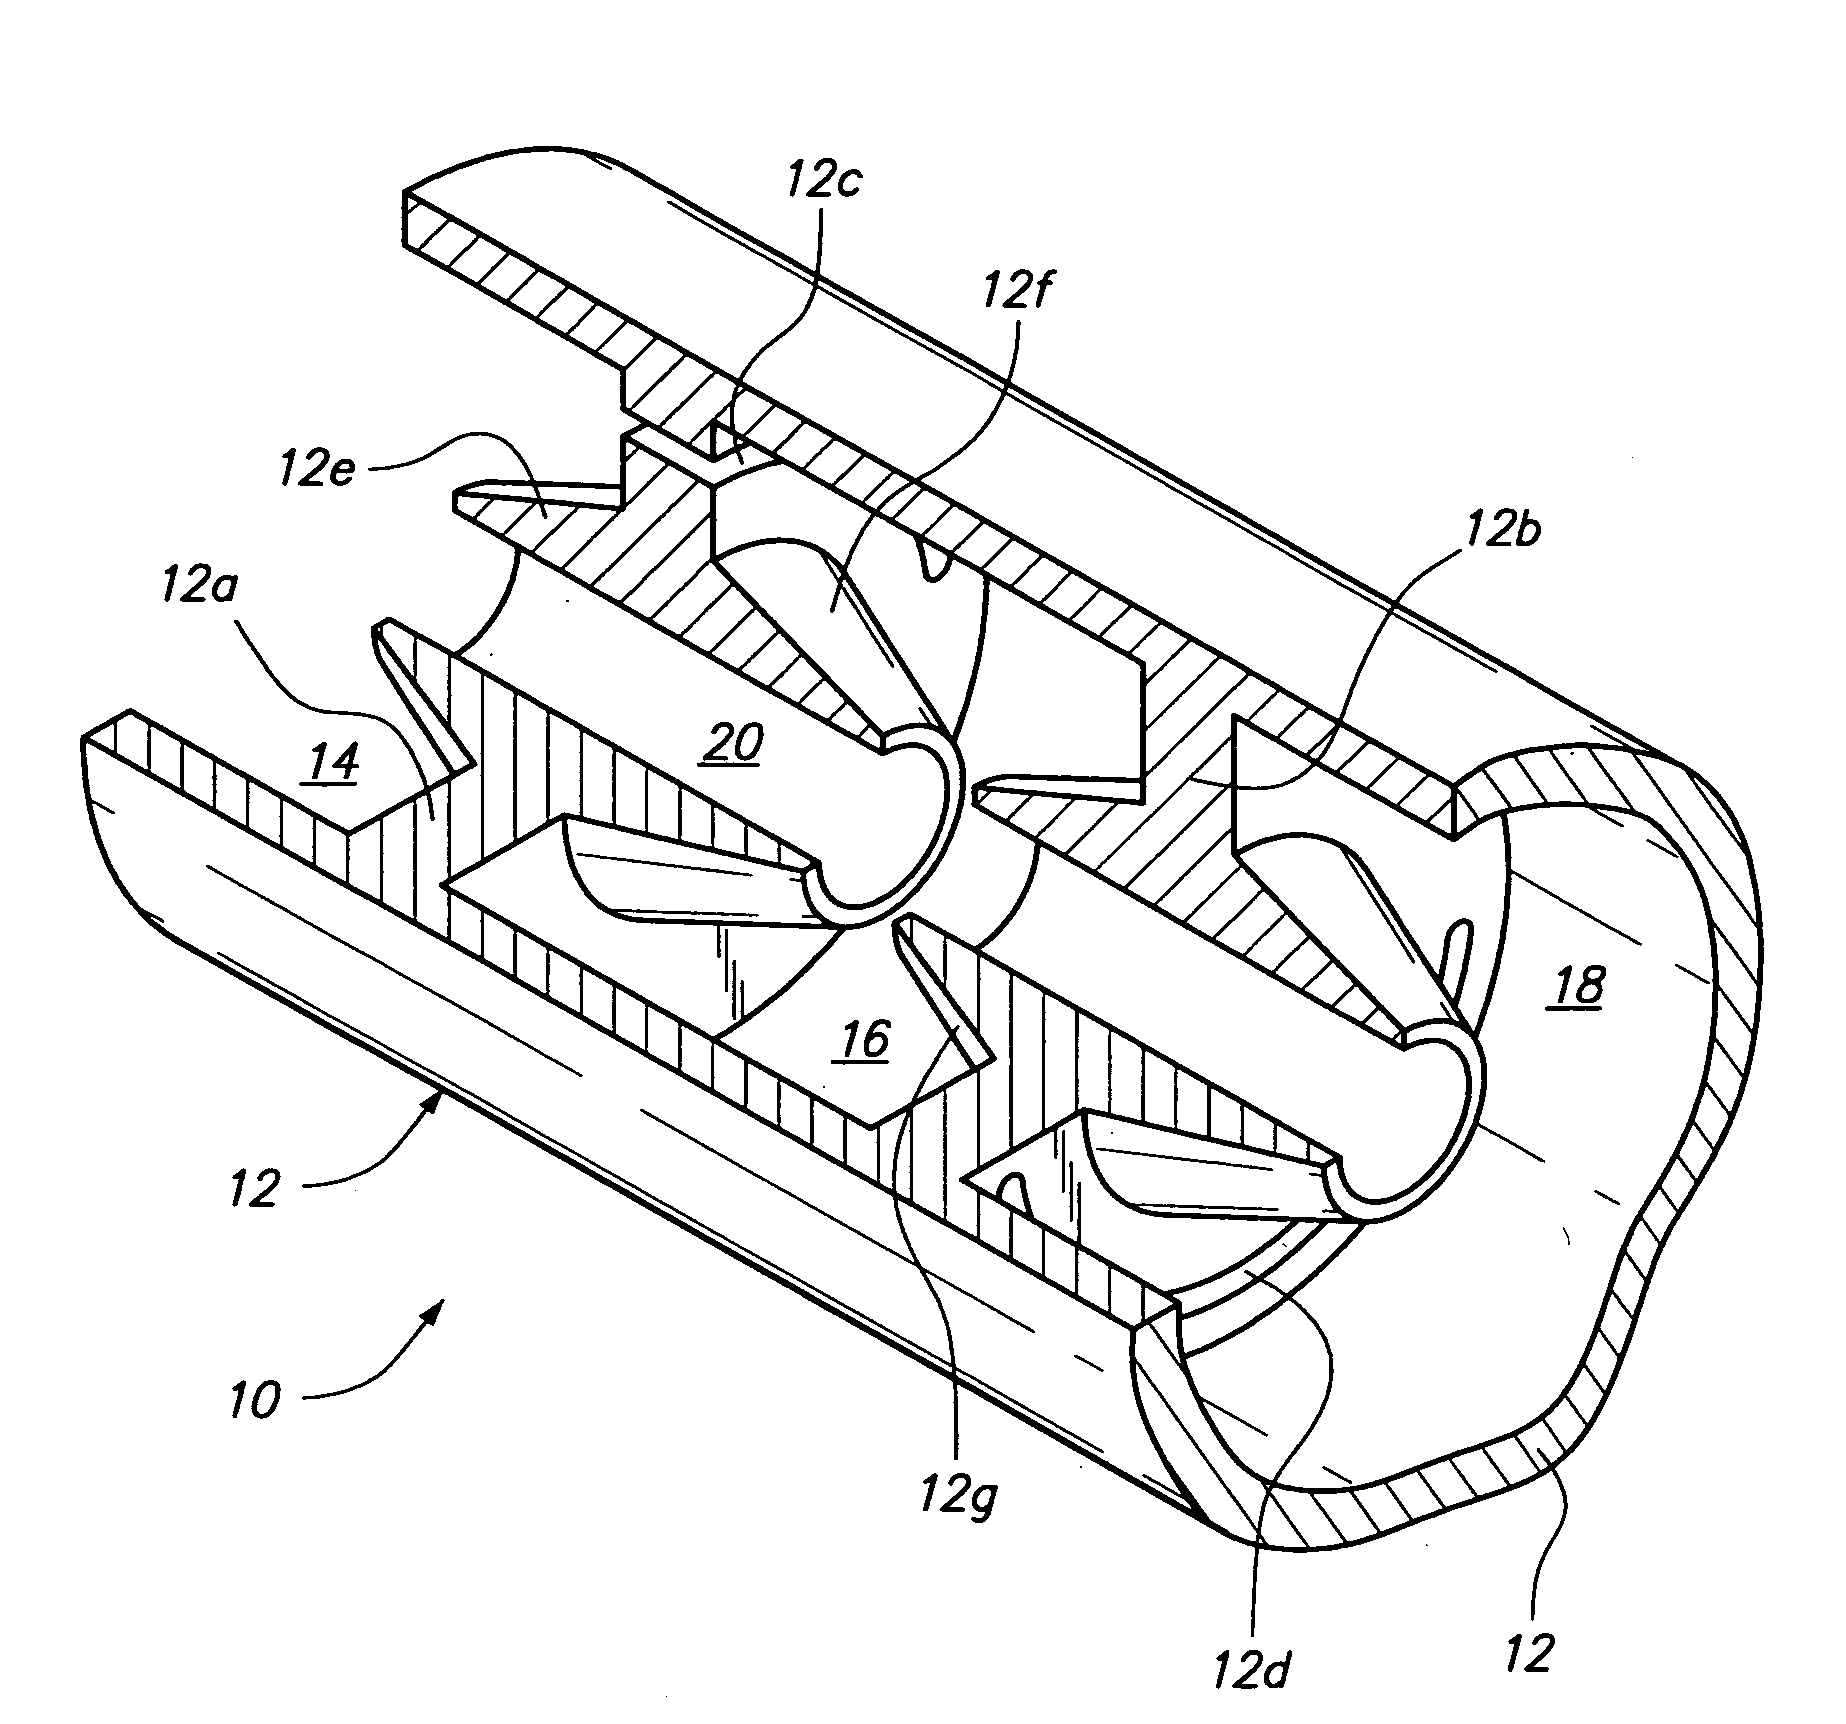 Slot resonance coupled standing wave linear particle accelerator